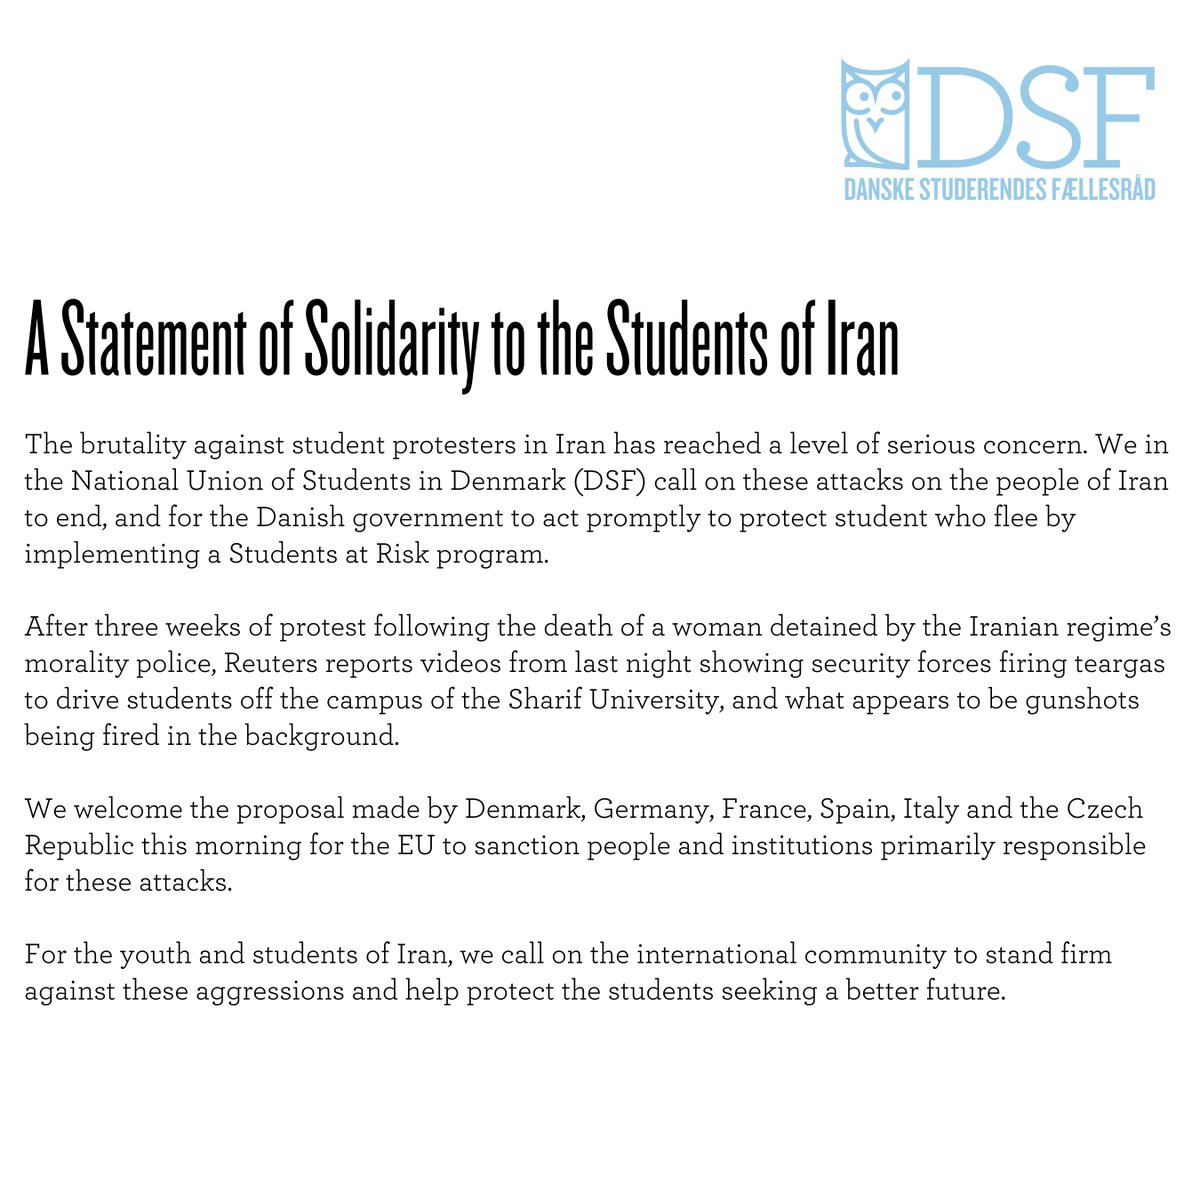 Today the National Union of Students in Denmark (@StudFaellesraad) issued a statement of solidarity to the students of Iran.